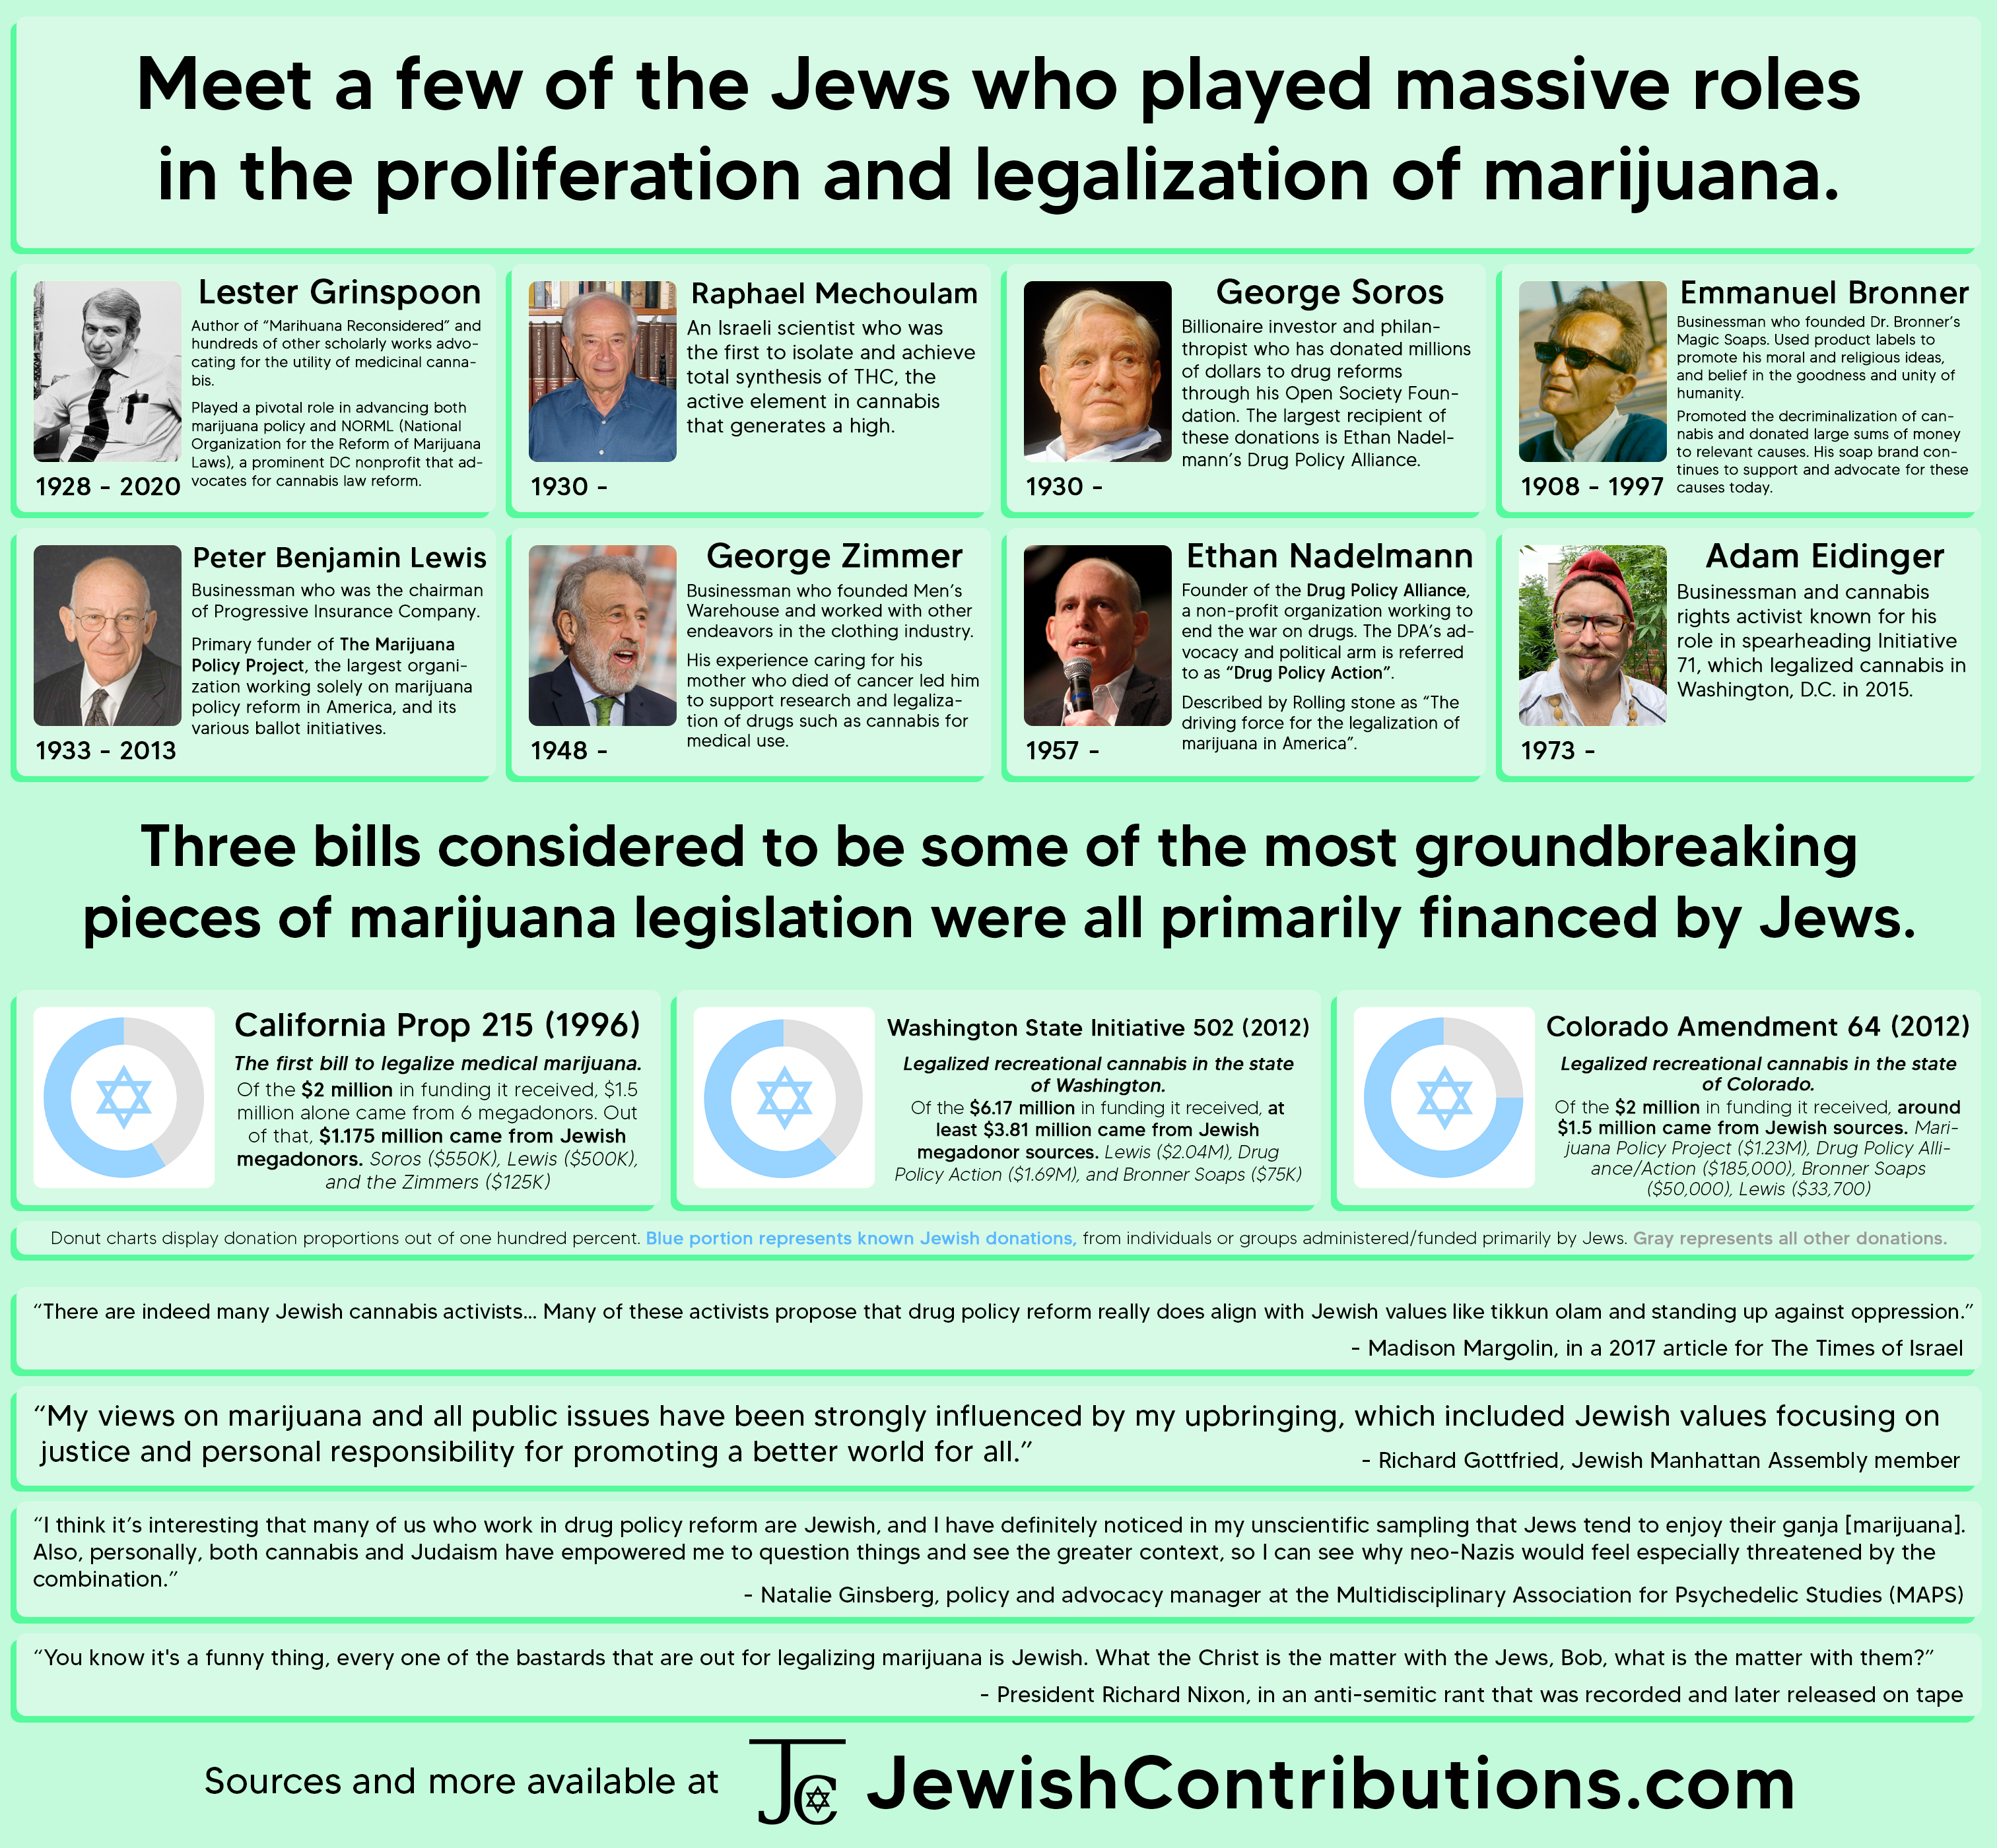 Jews have played a massive role in efforts to legalize marijuana usage in America.